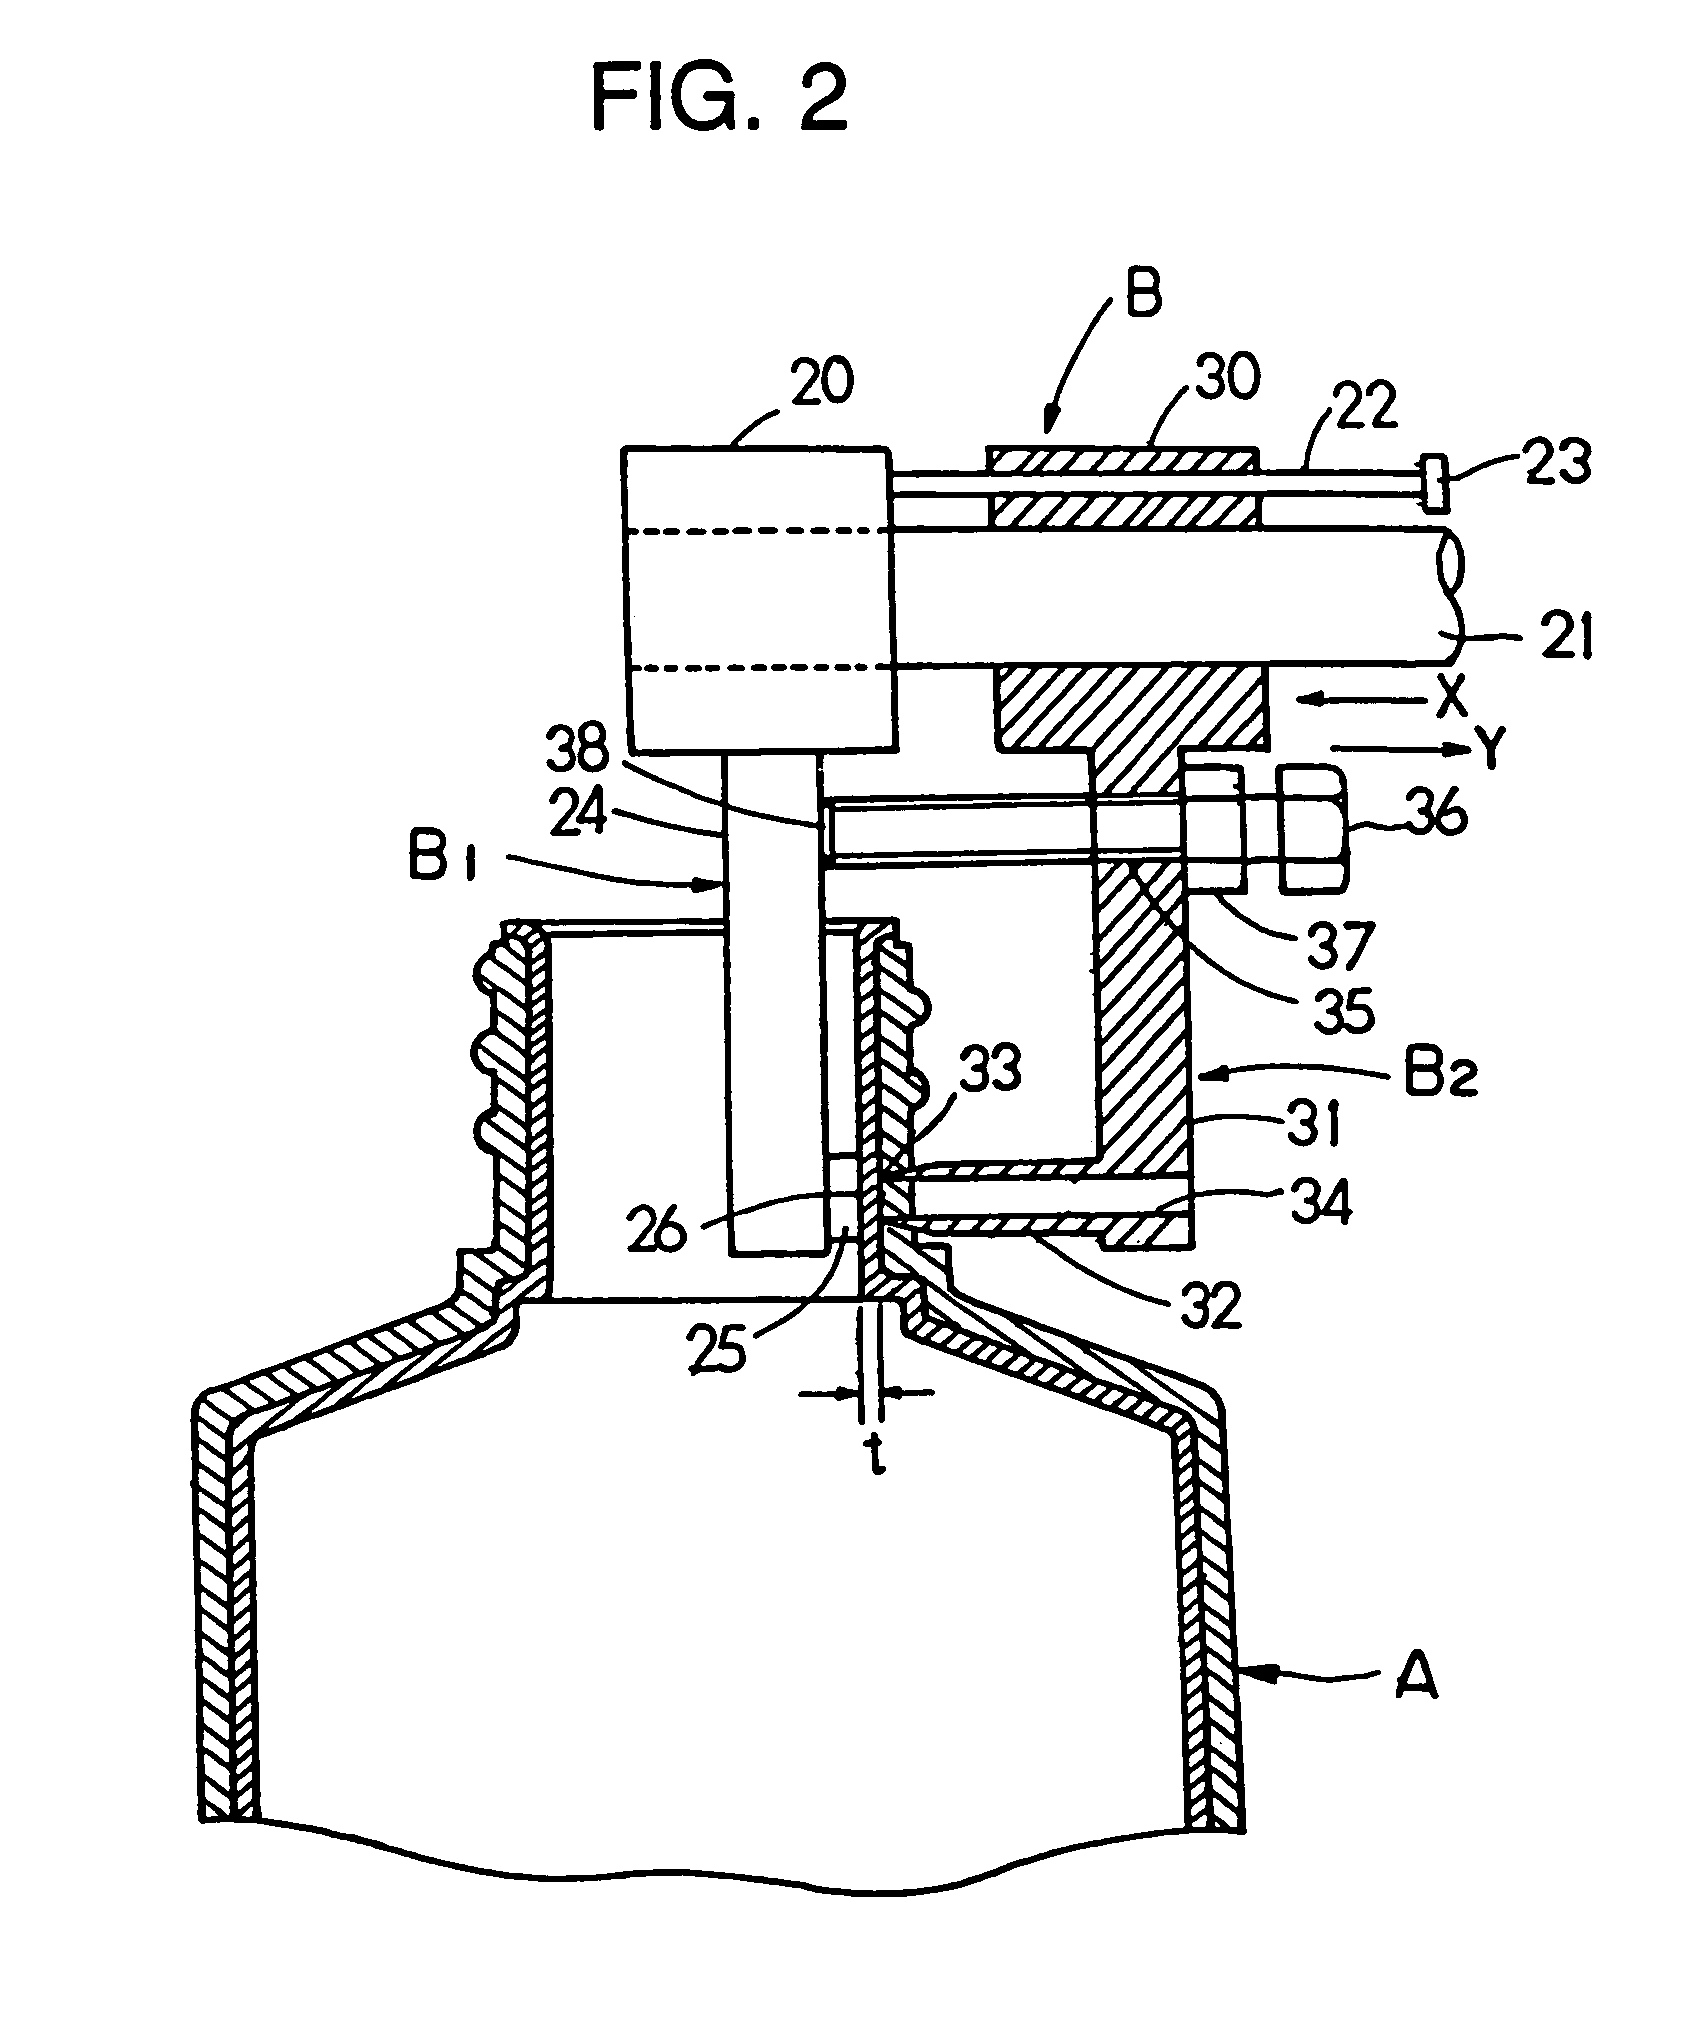 Separable laminated container and associated technology